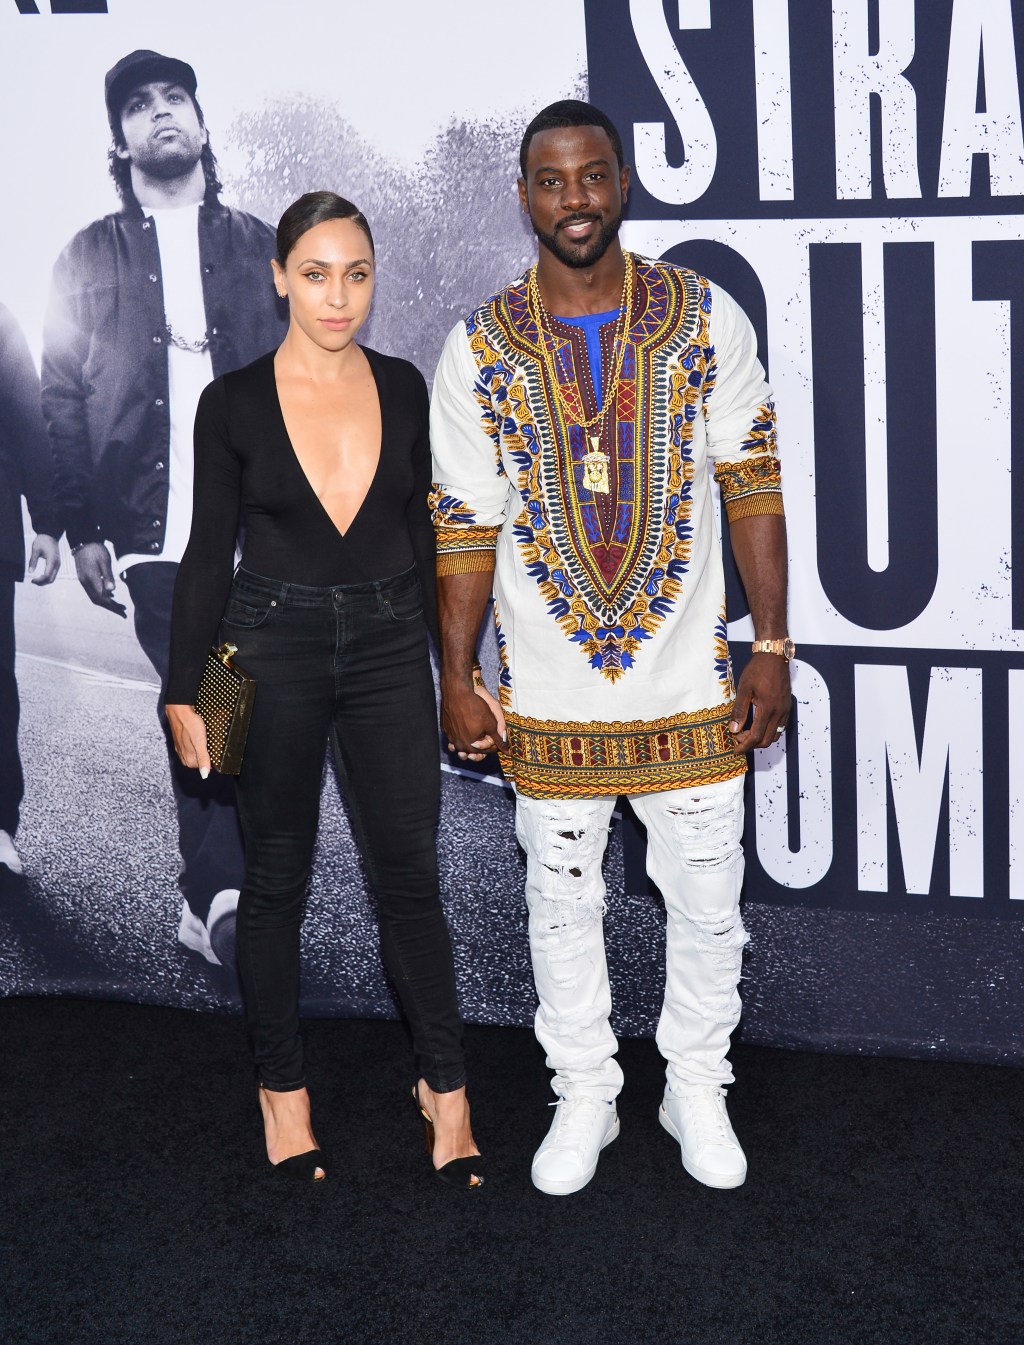 Premiere Of Universal Pictures And Legendary Pictures' 'Straight Outta Compton' - Arrivals